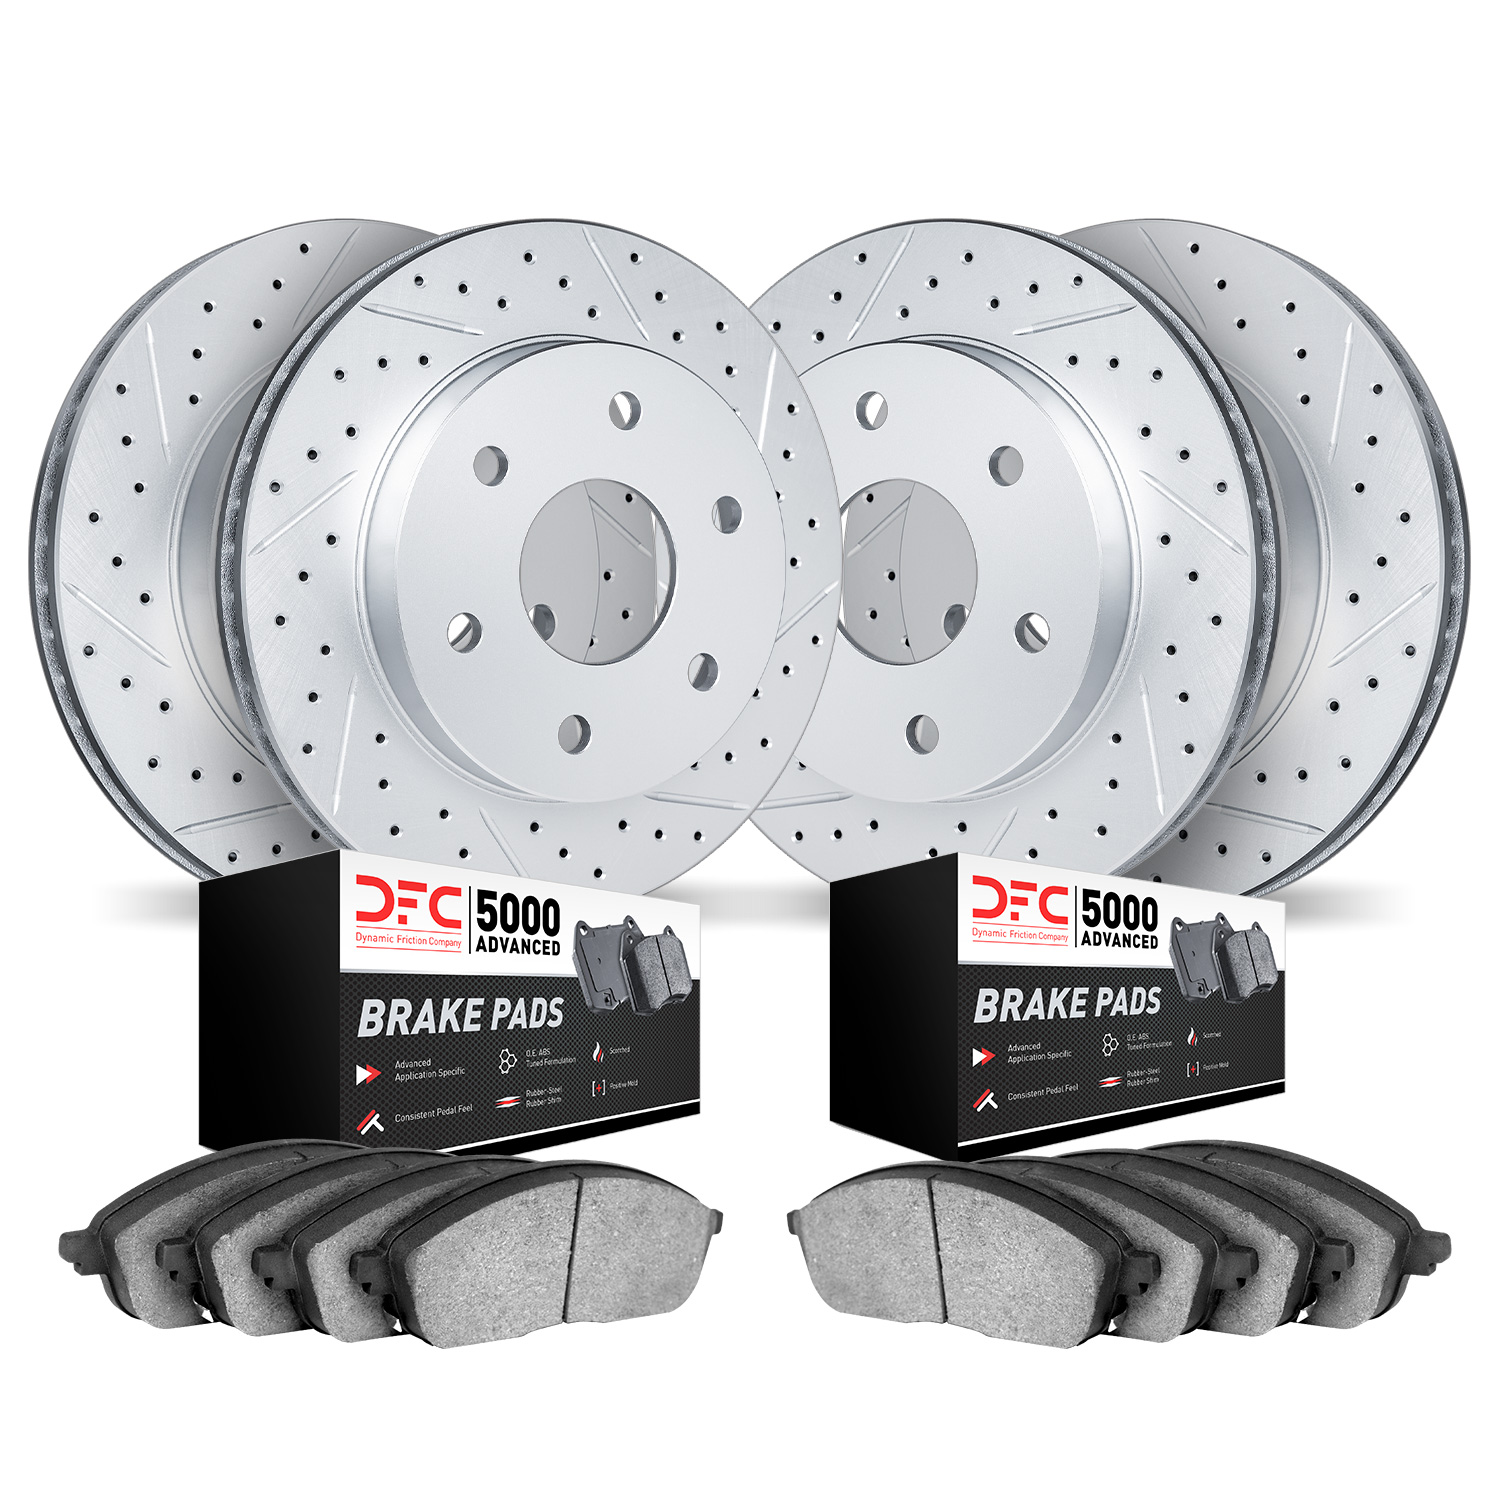 2504-76104 Geoperformance Drilled/Slotted Rotors w/5000 Advanced Brake Pads Kit, 2001-2002 Lexus/Toyota/Scion, Position: Front a